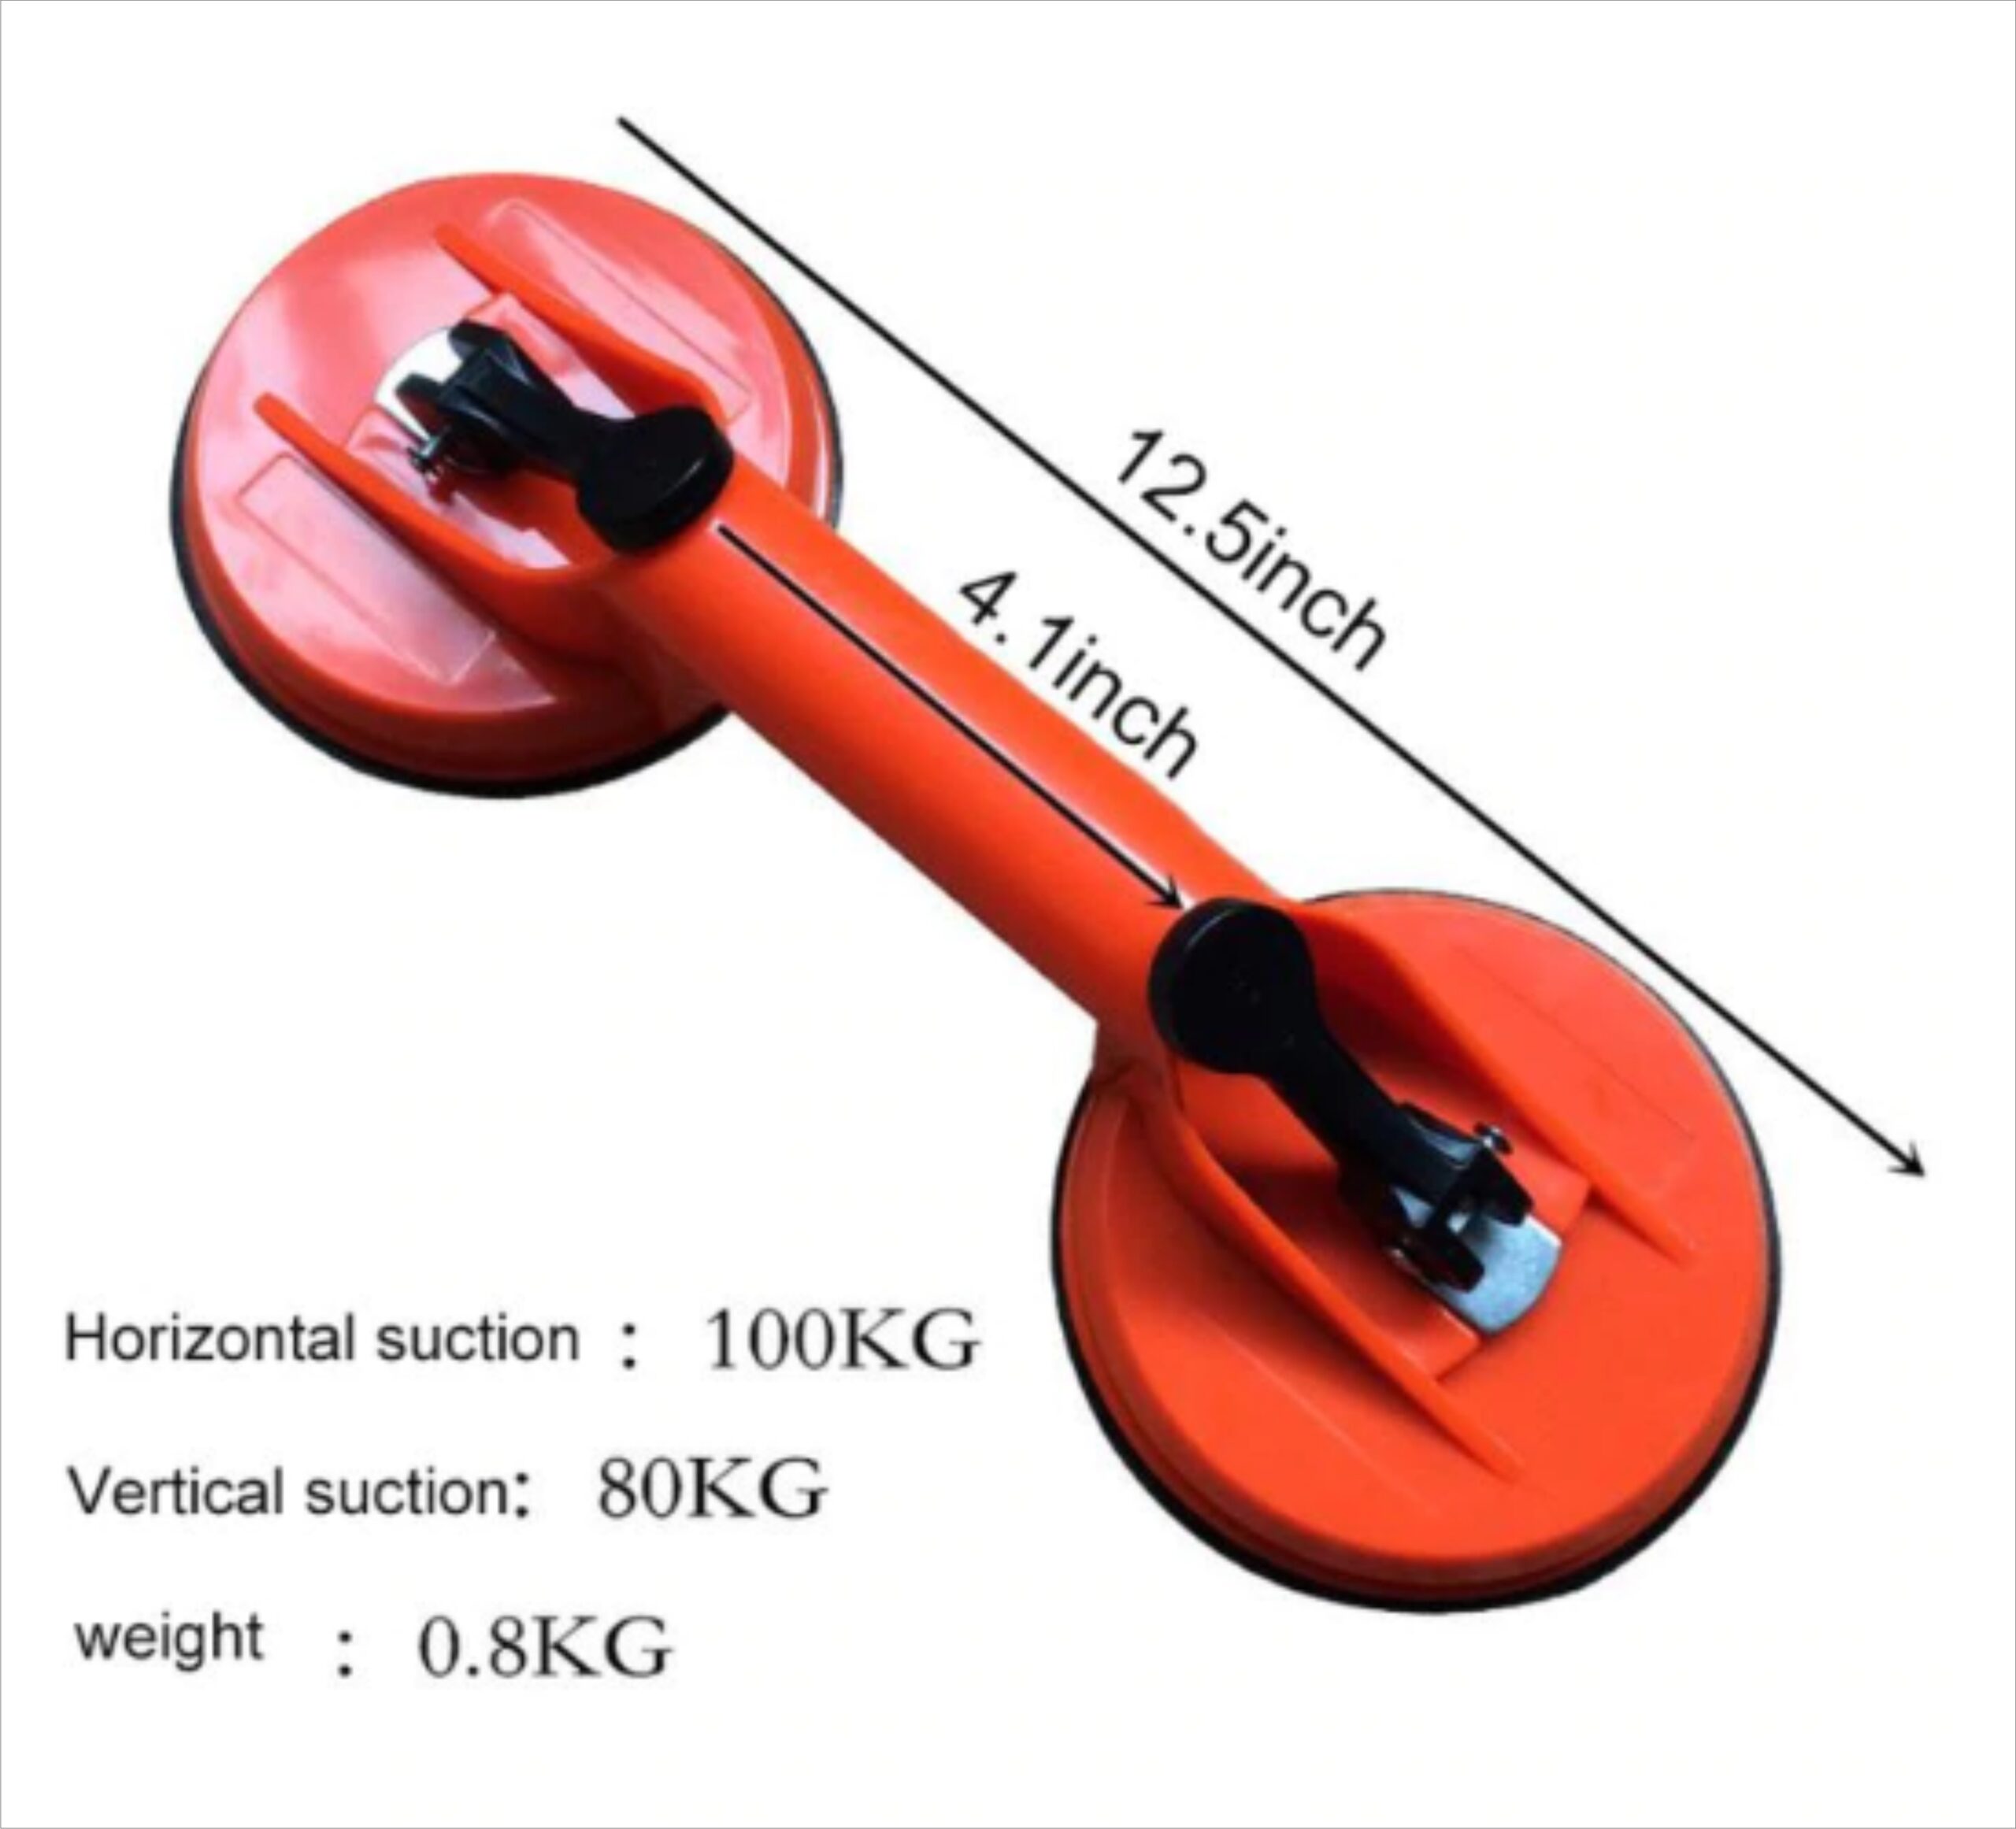 Glass-suction-cups glass-vacuum-lifter-price glass-vacuum-suction-cups glass suction lifter (2)